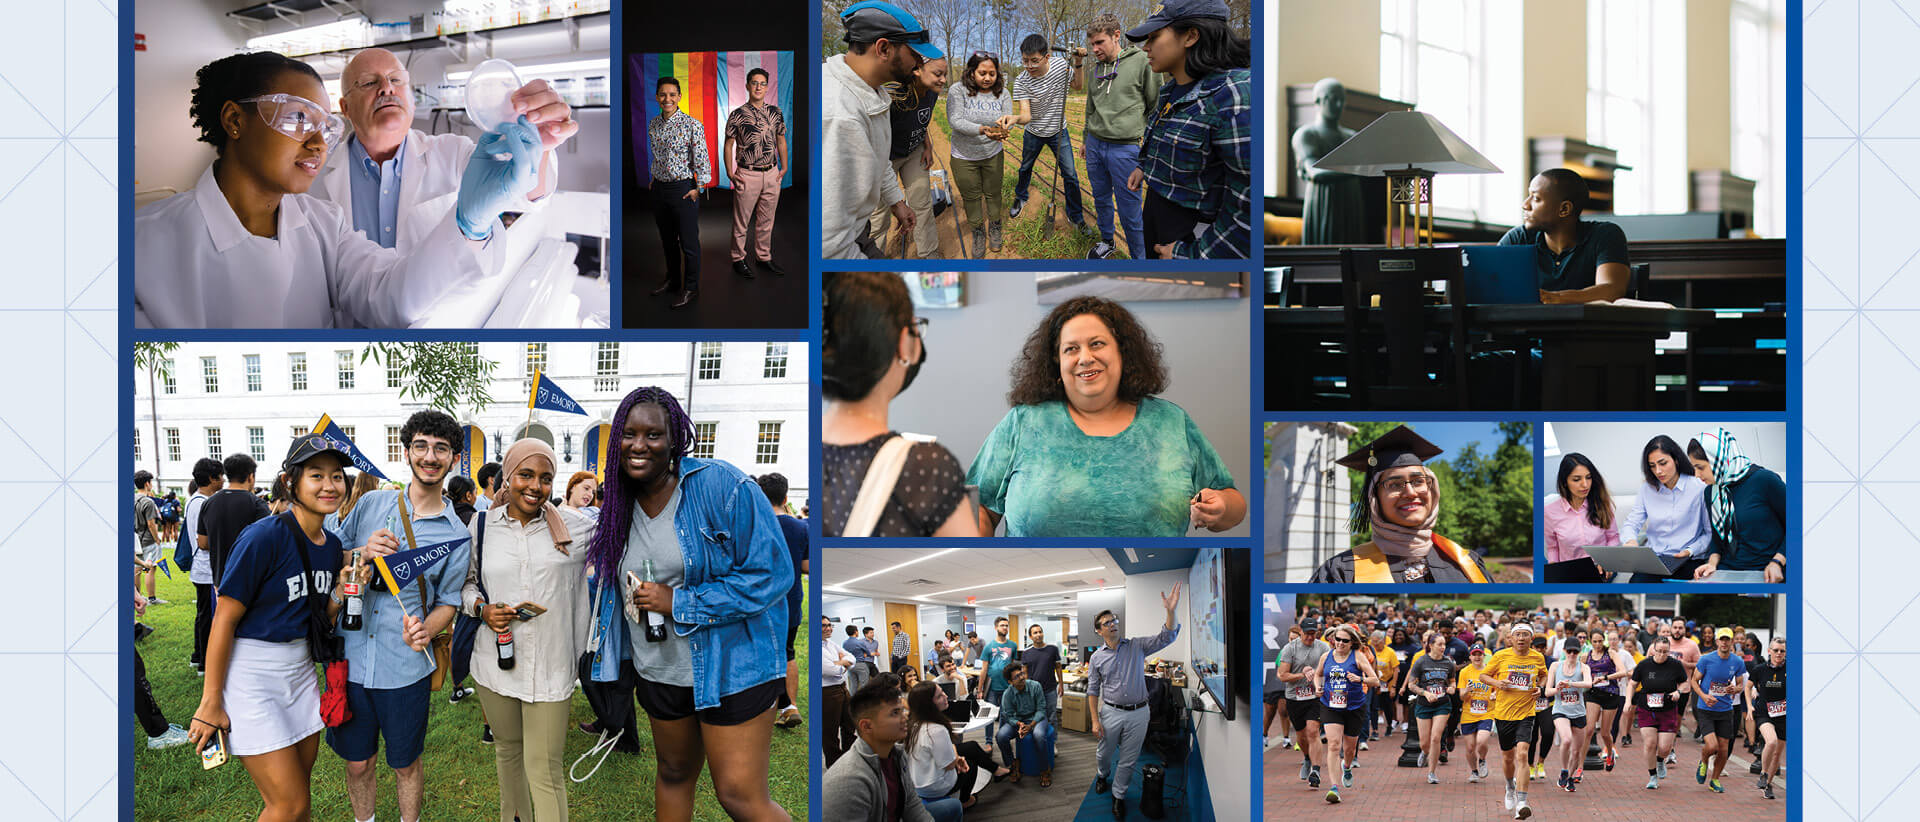 collage of images that illustrate the diversity of people at Emory